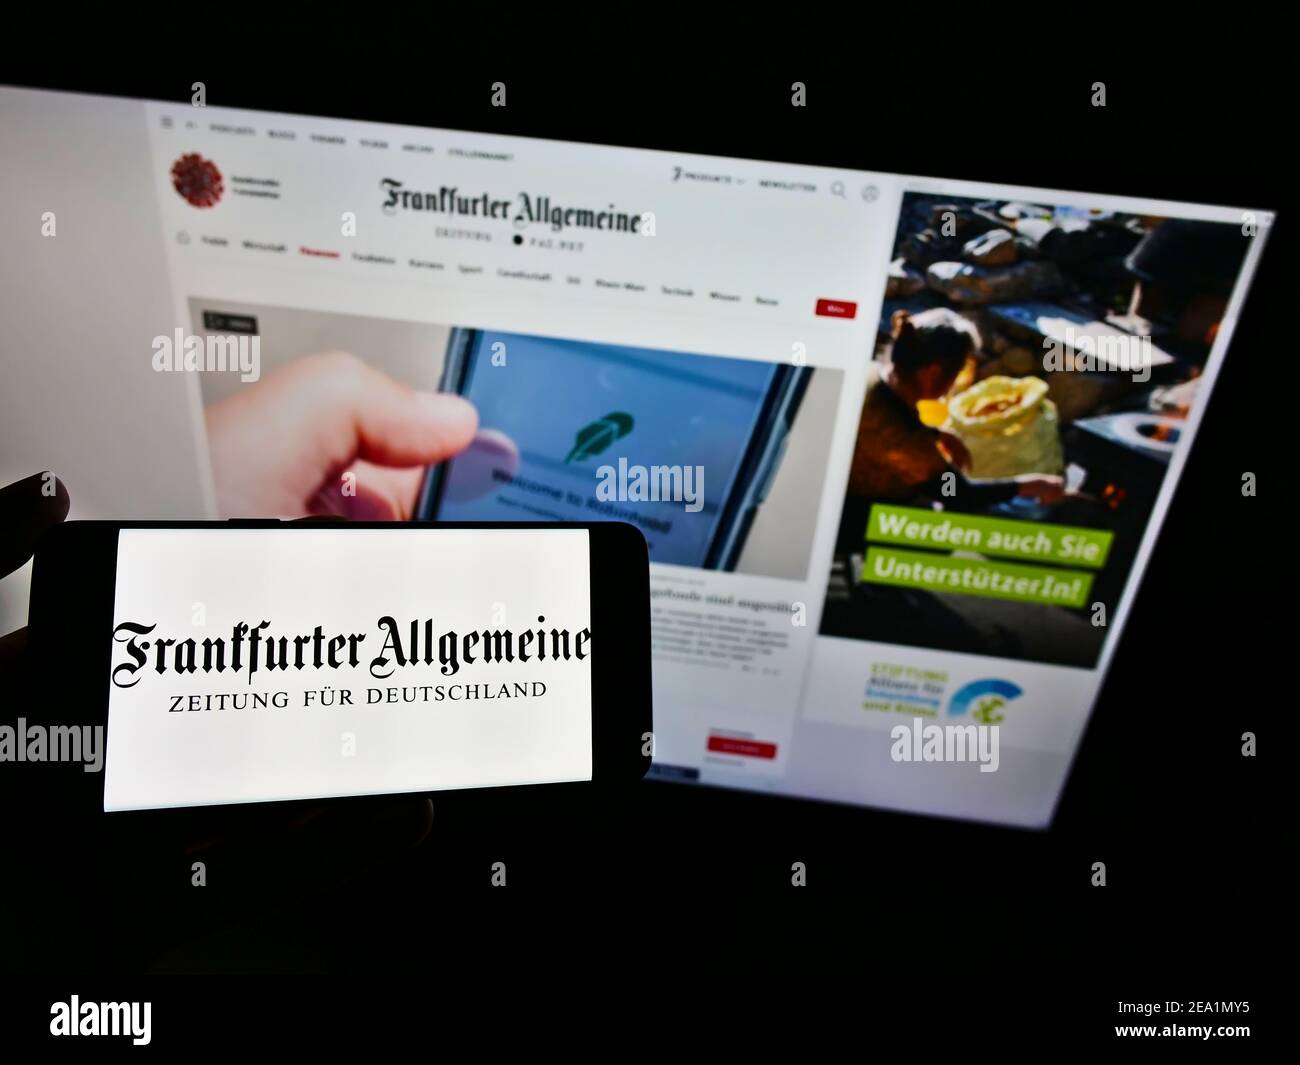 Person holding mobile phone with logo of German newspaper Frankfurter Allgemeine Zeitung (FAZ) on screen in front of website. Focus on phone display. Stock Photo